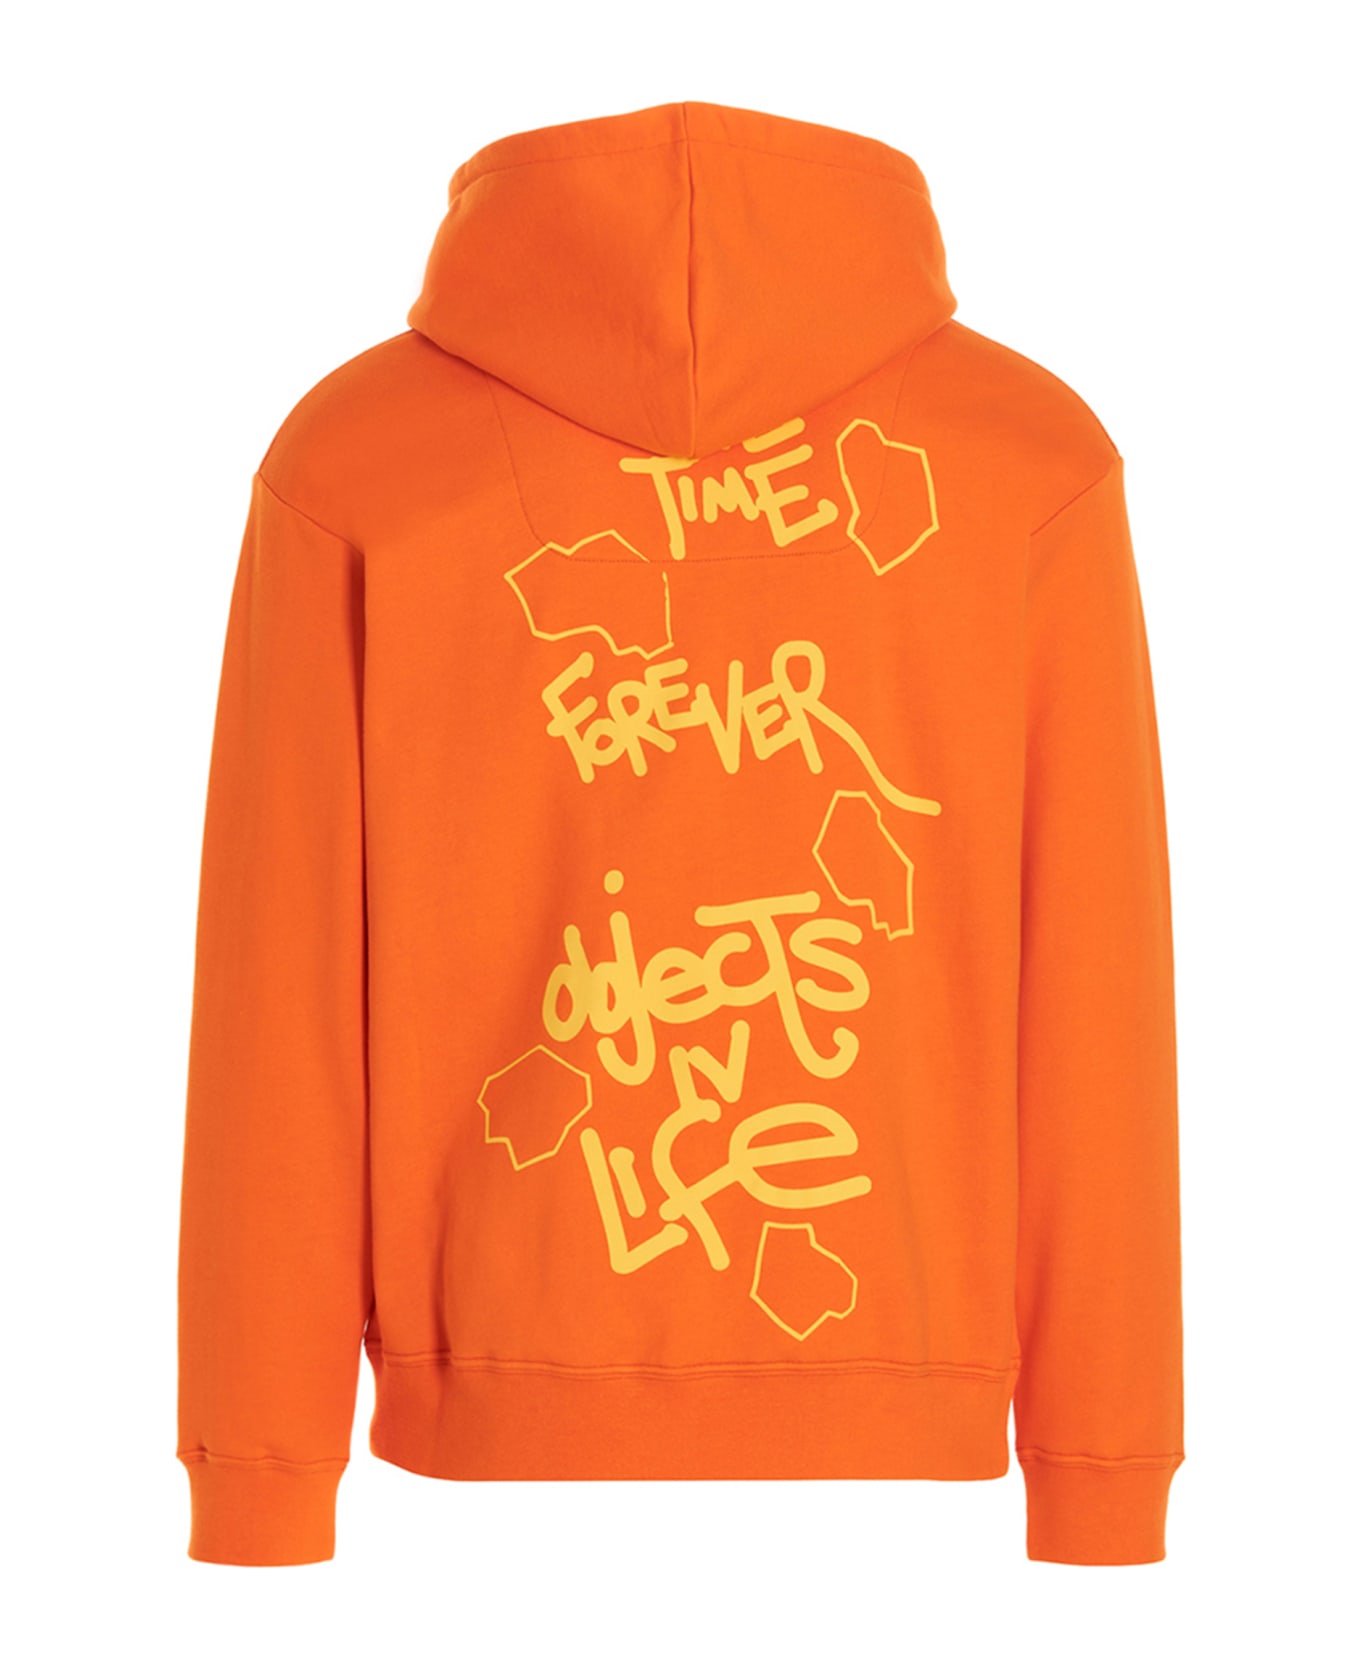 Objects Iv Life 'continuity' Hoodie - Orange